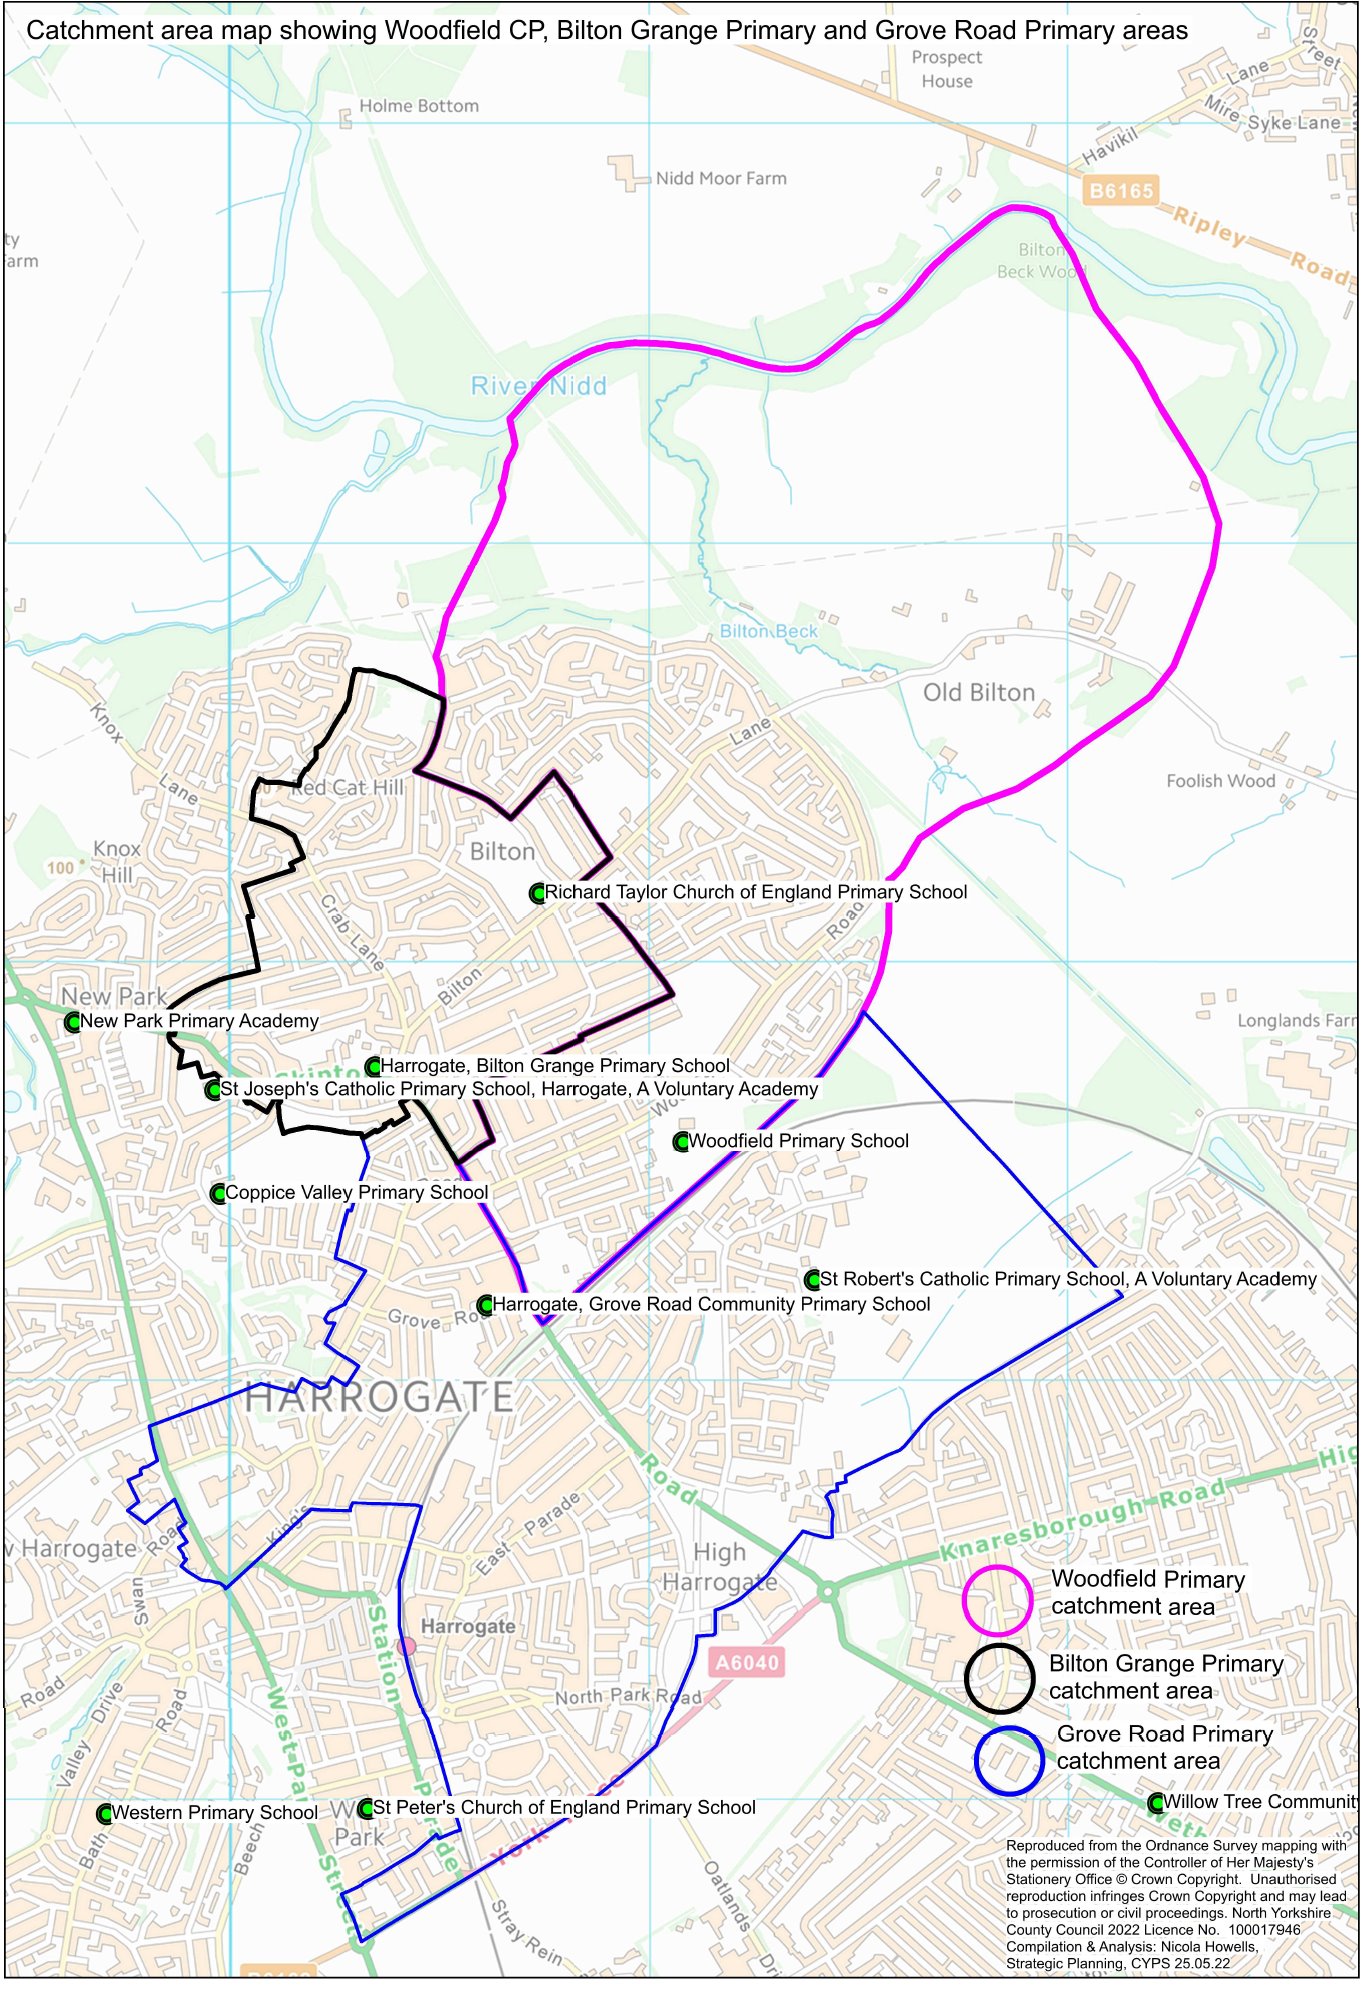 "Catchment area map showing Woodfield CP, Bilton Grange Primary and Grove Road Primary areas"